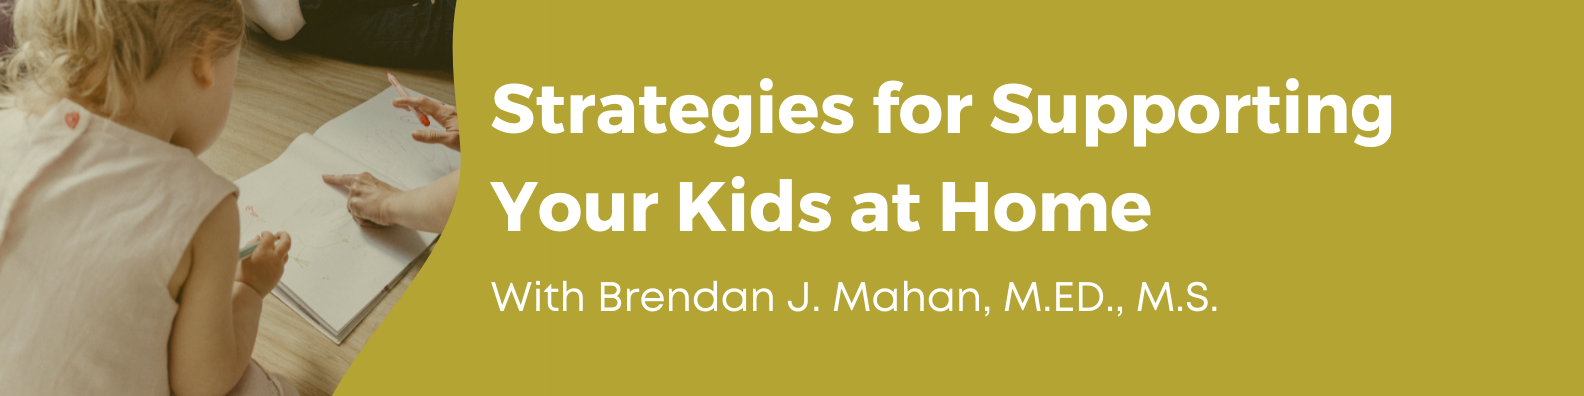 Strategies for Supporting Your Kids at Home with Brendan J. Mahan, M.ED., M.S.